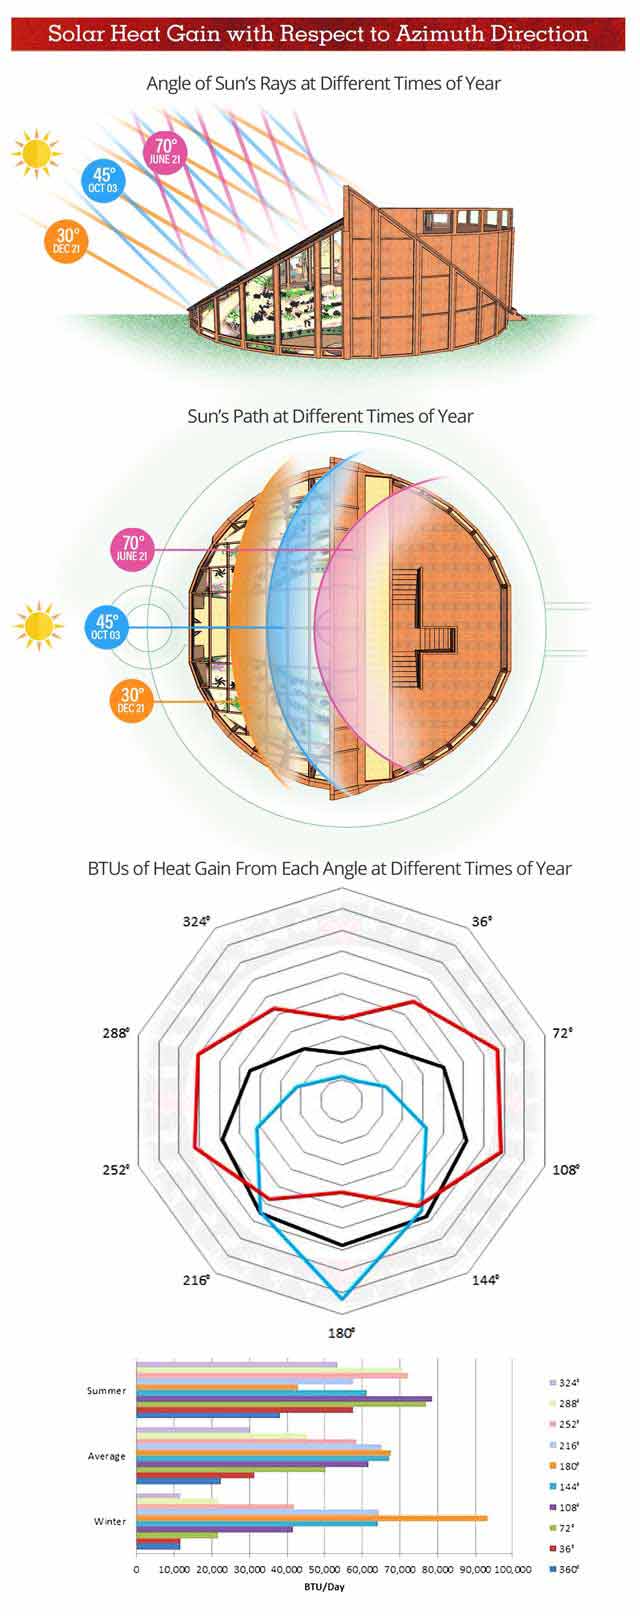 Solar Heat Gain with Respect to Azimuth Direction, Harness this Natural Source, Shield This Powerful Force, Angle of Sun's Rays at Different Times of Year